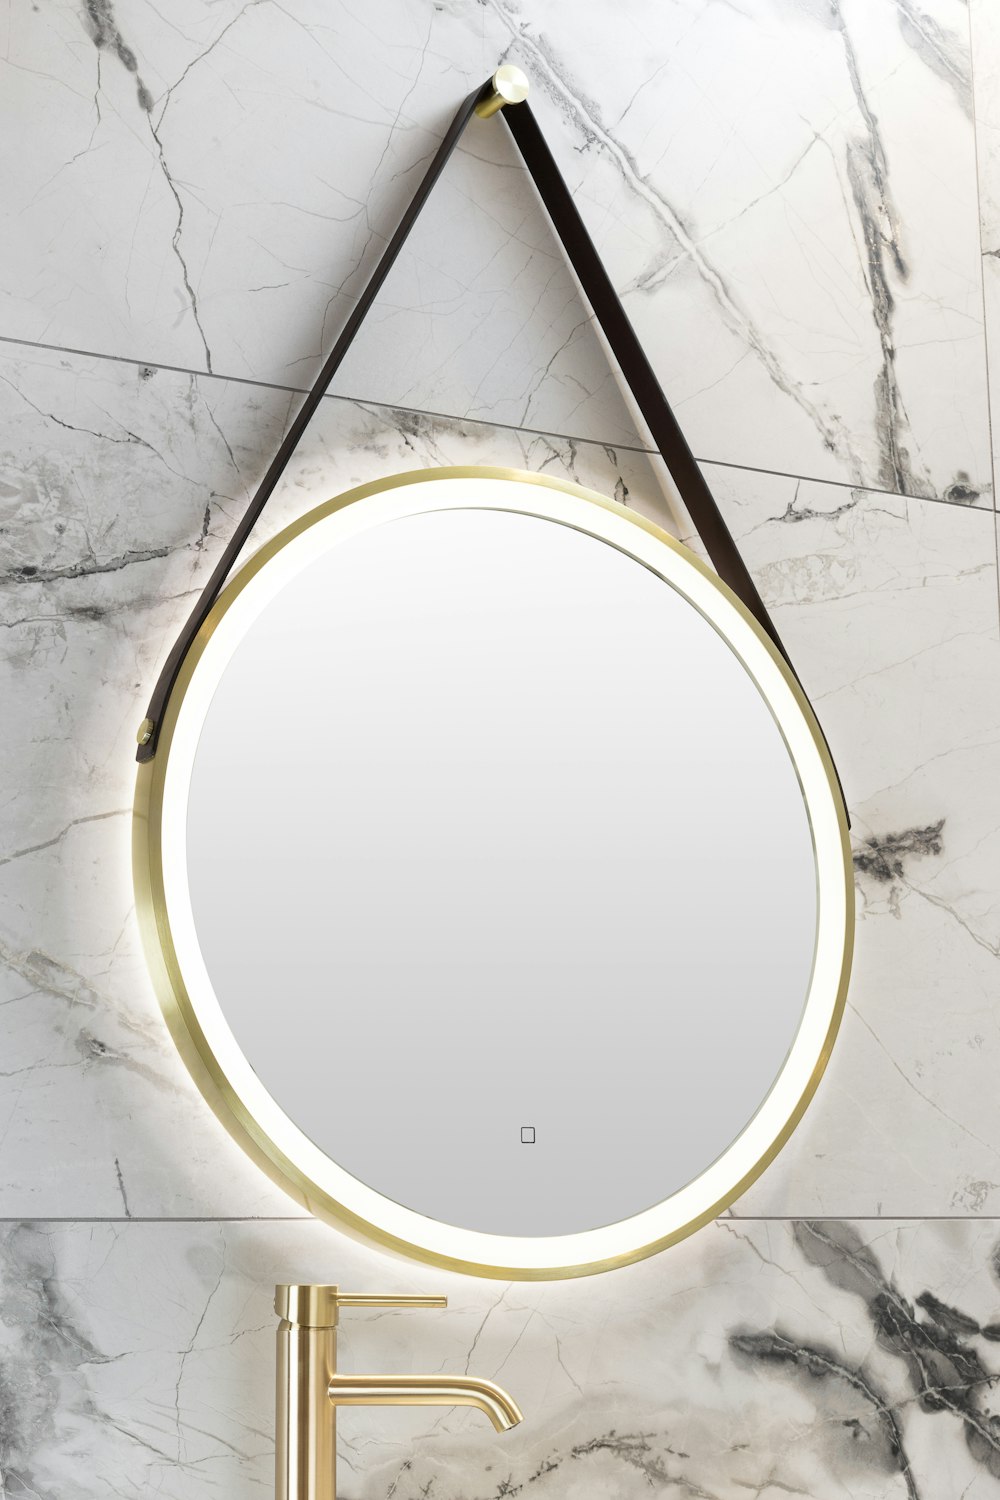 a round mirror hanging on the wall above a sink